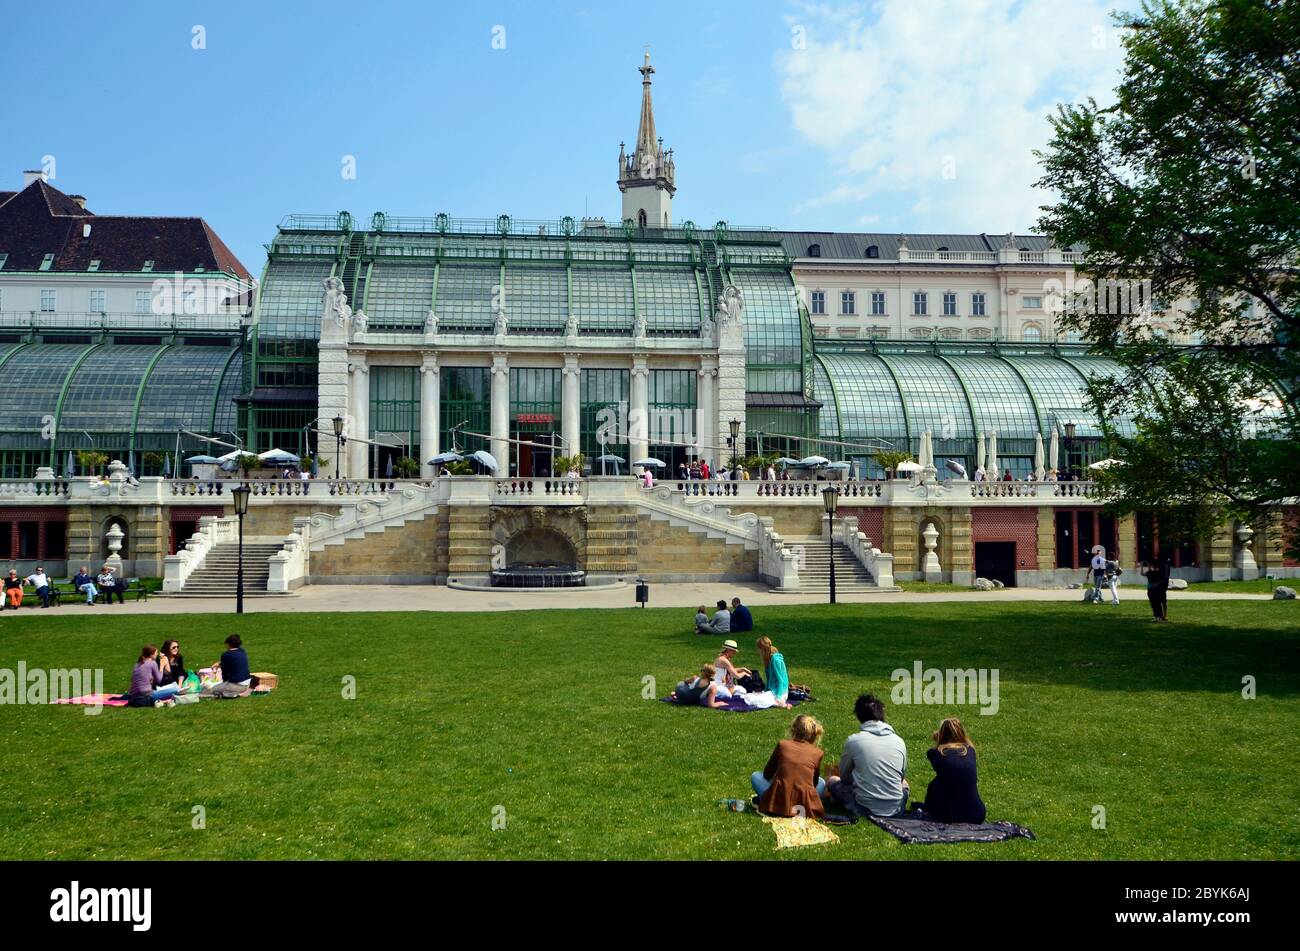 Vienna, Austria - April 24th 2011: unidentified people take a picnic in the grass of the public Burggarten with view to the new renovated palm house a Stock Photo